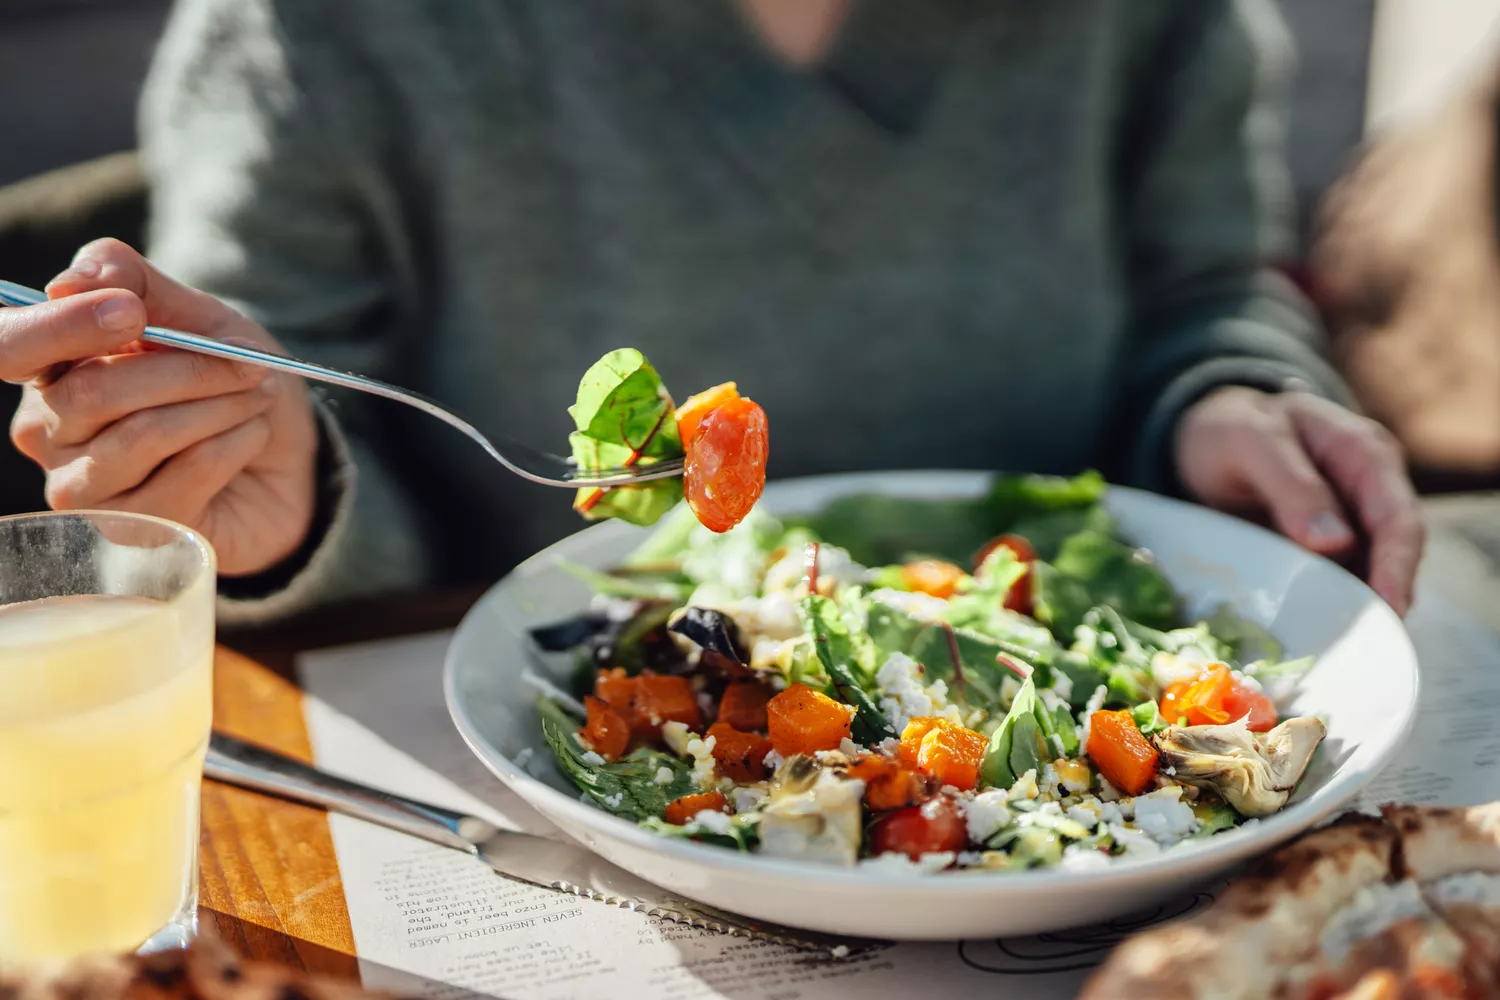 Following a Vegetarian Diet May Increase Risk of Hip Fracture, Study Finds